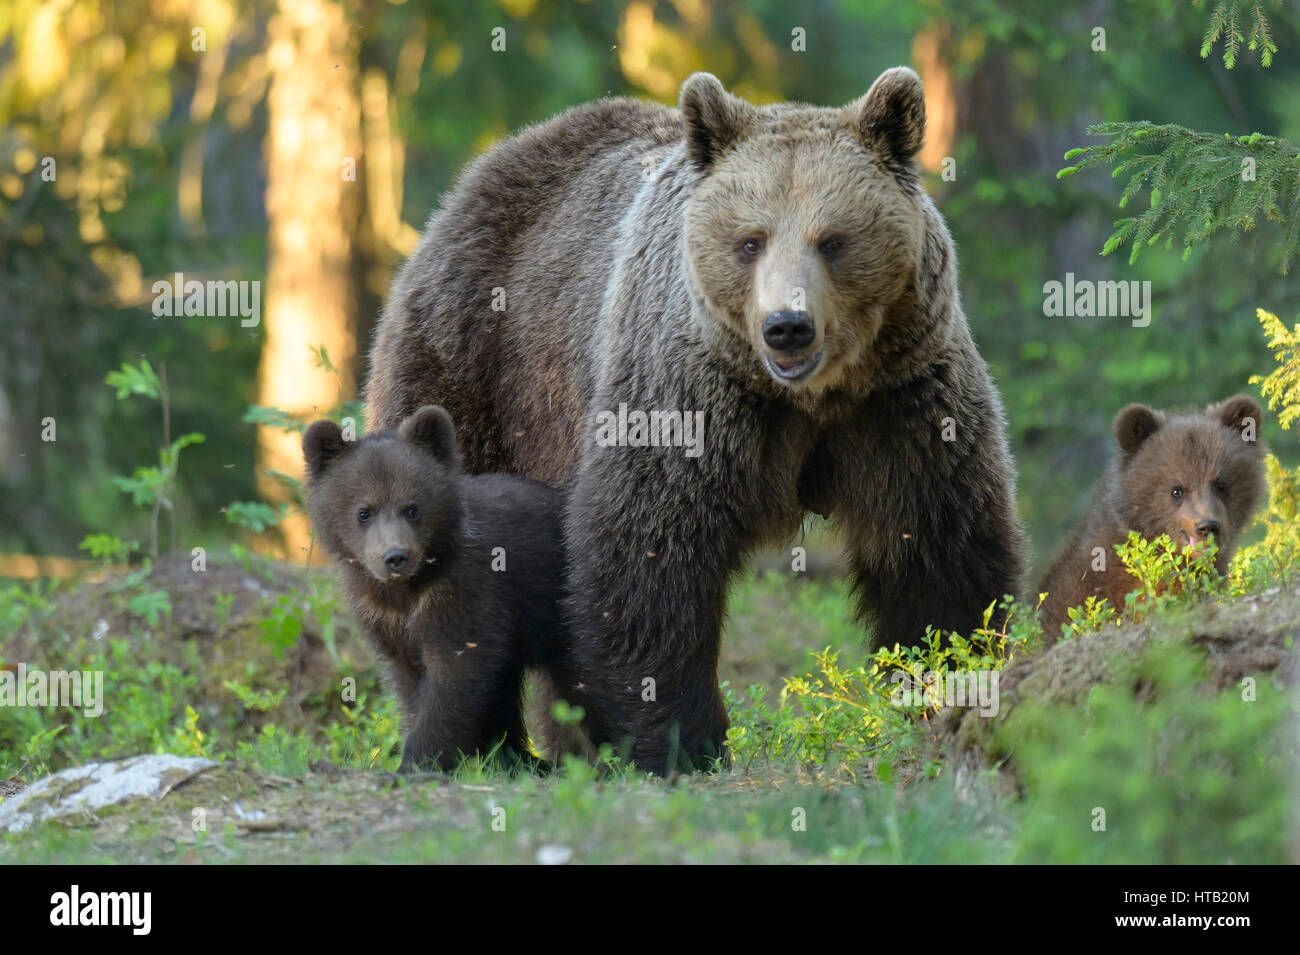 Brown bear with young animal, she-bear with boys in the wood, Braunbaer mit Jungtier, Baerin mit Jungen im Wald Stock Photo